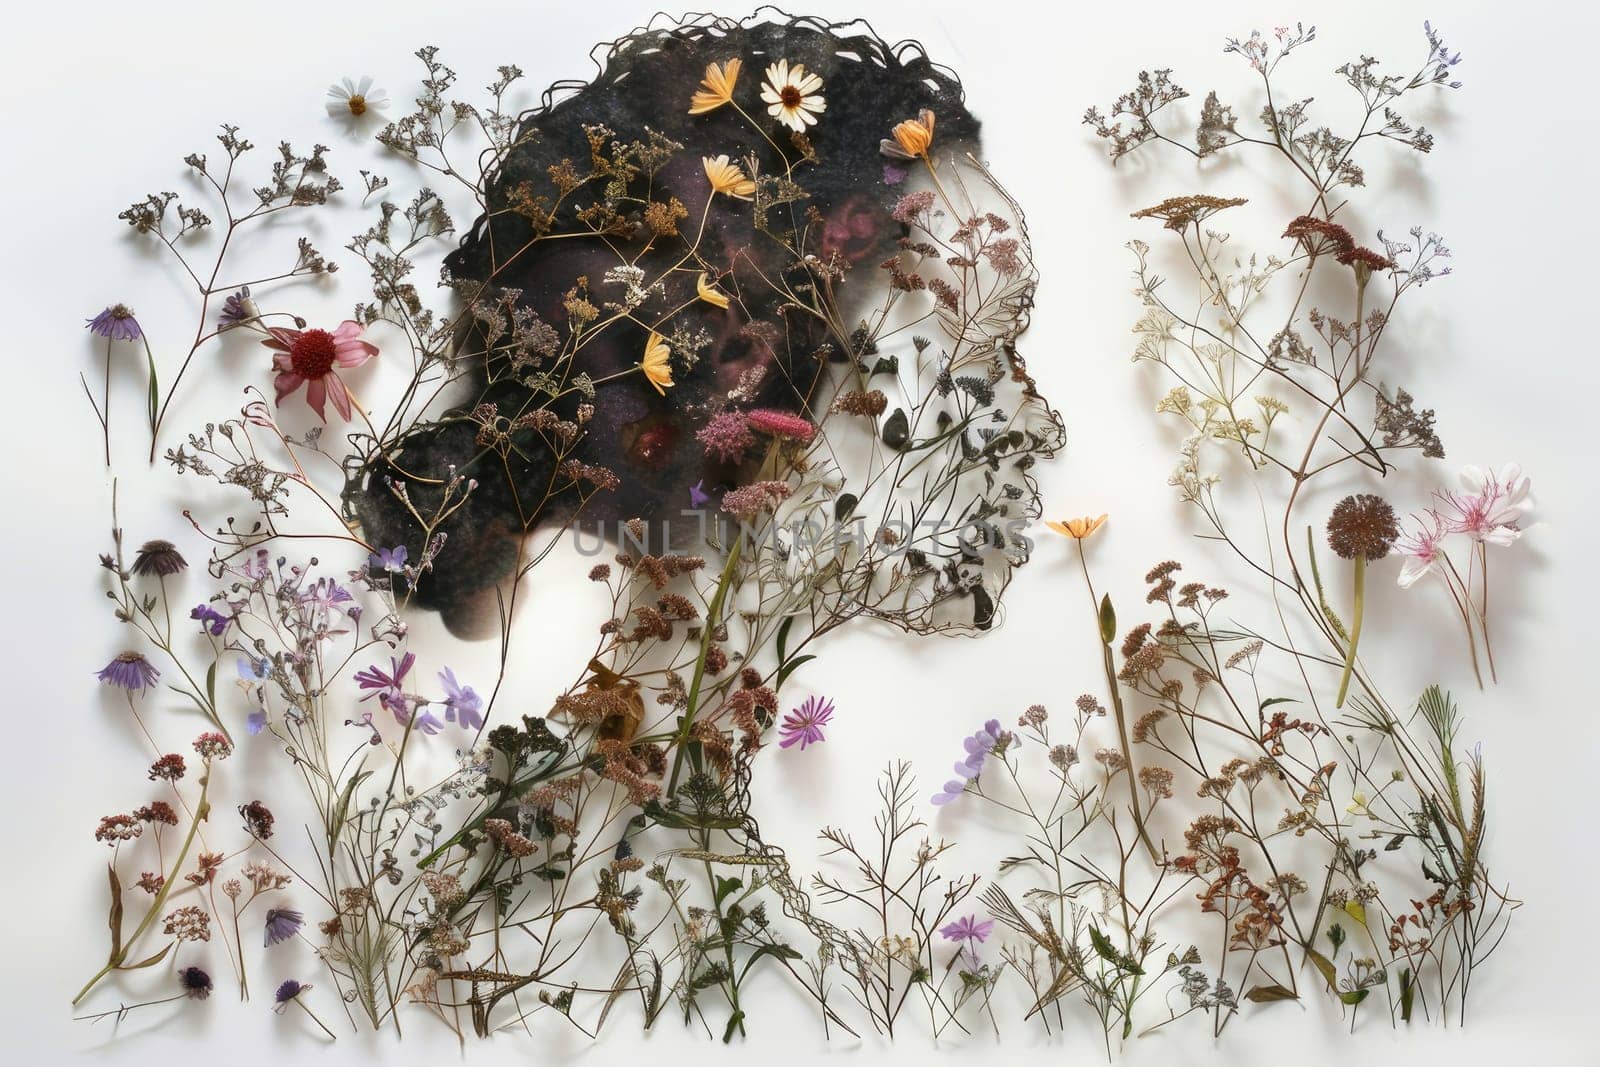 Artwork made from Pressed Flowers and mulberry paper